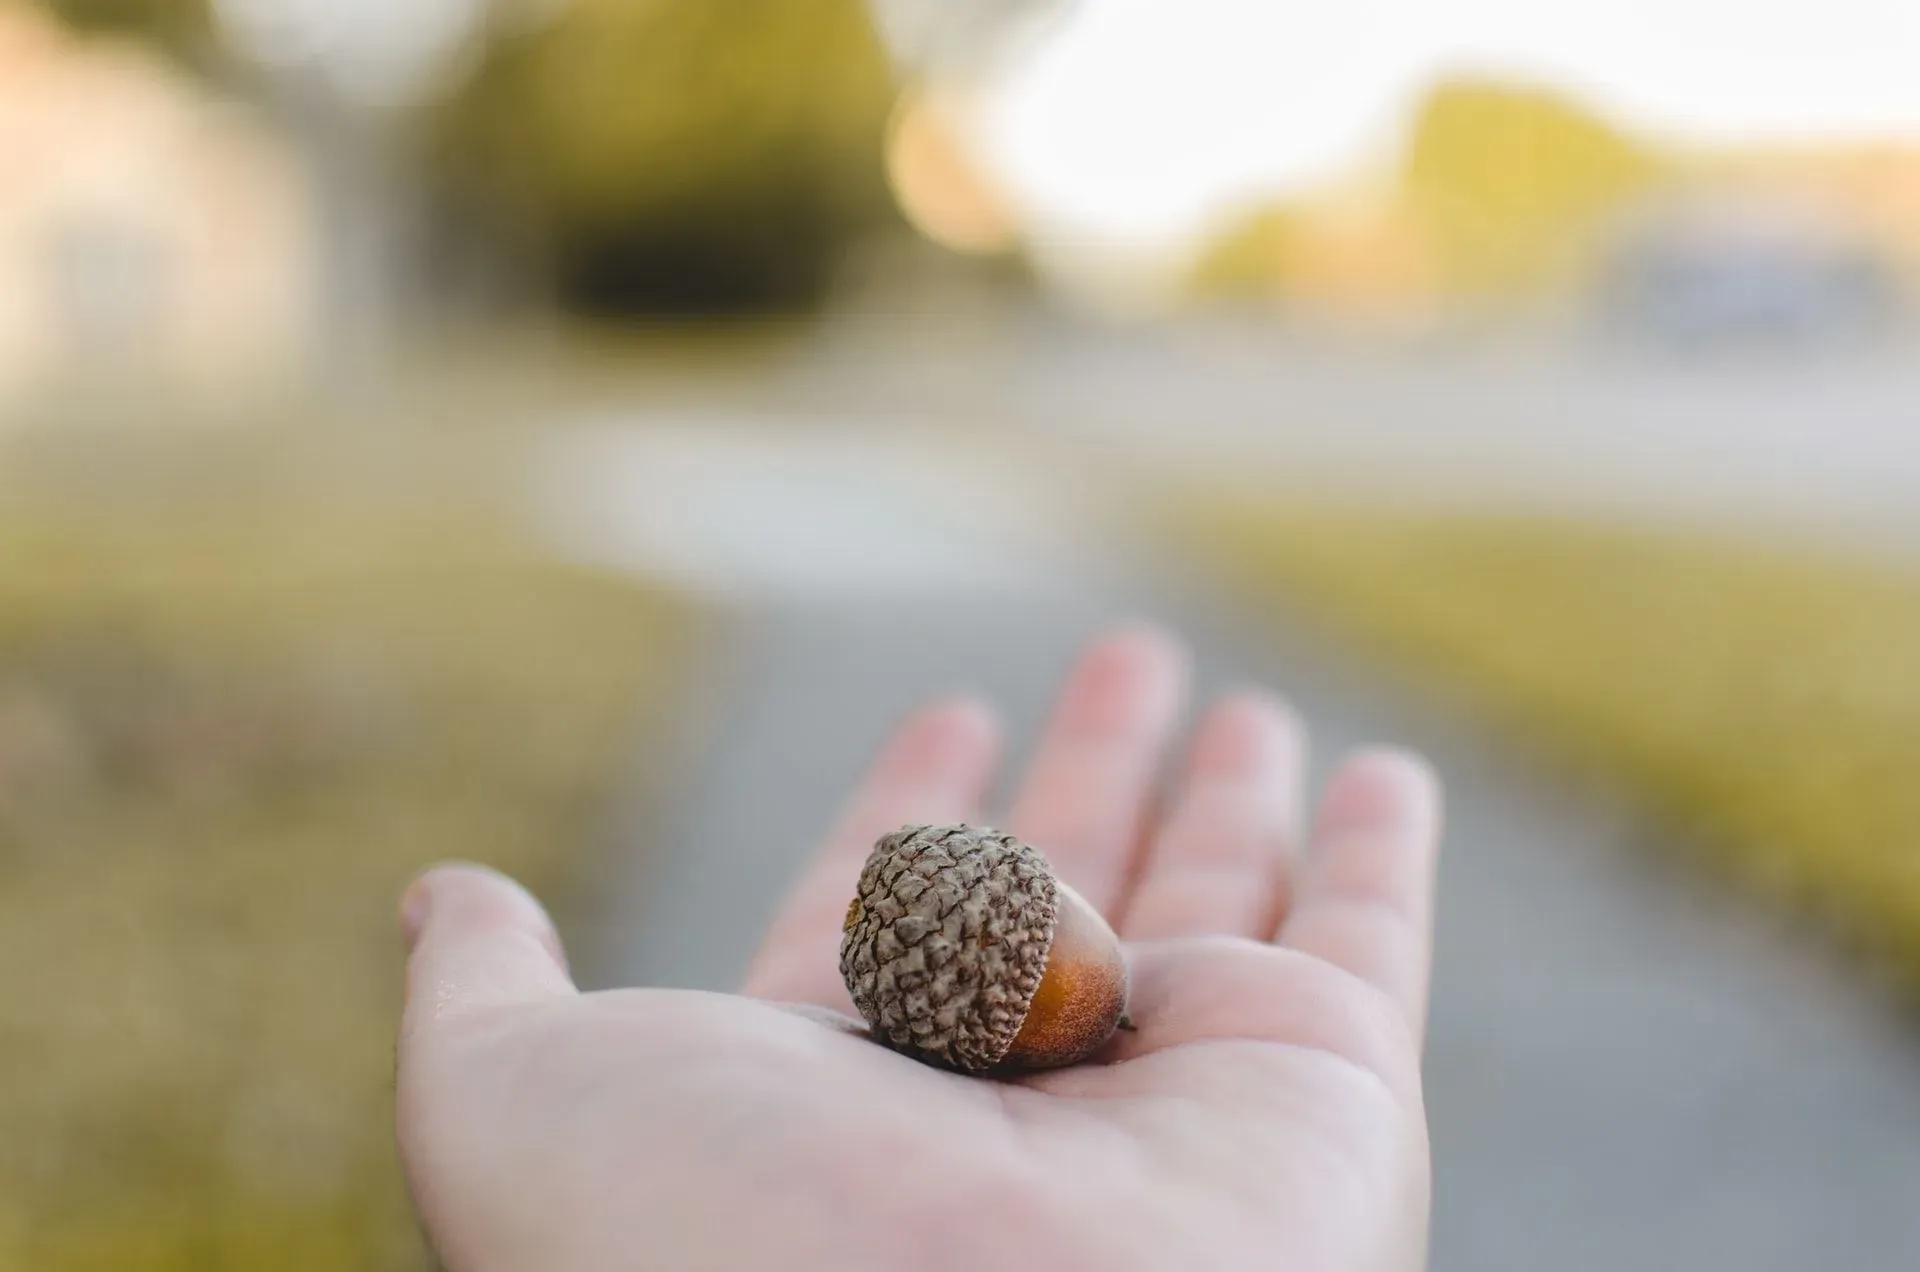 Acorns only contain one seed for a new oak tree to grow from.